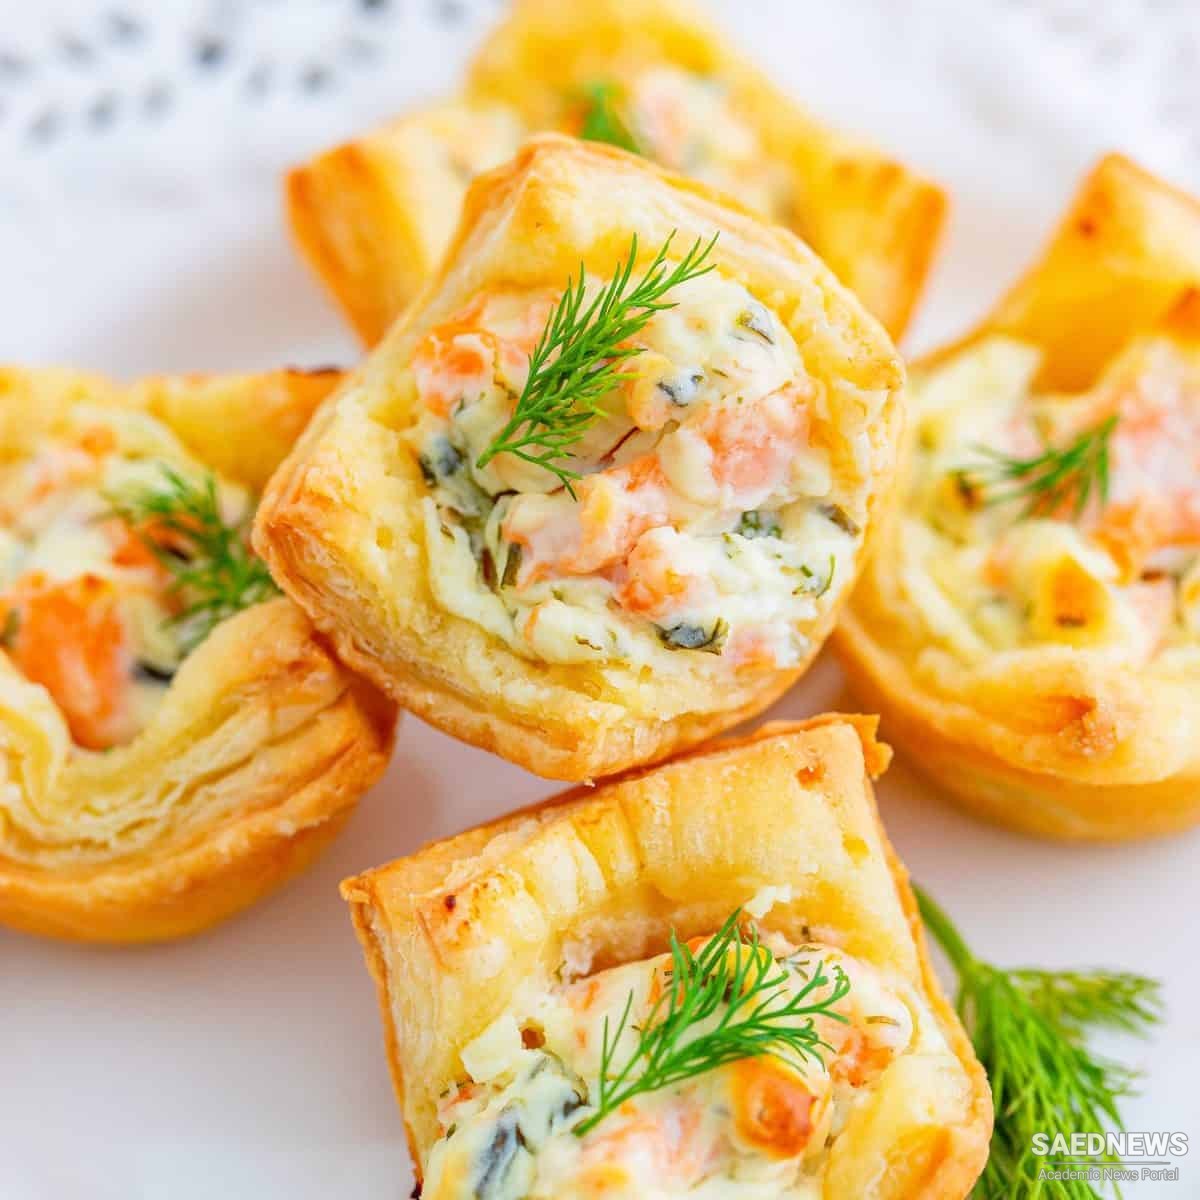 Salmon in Puff Pastry